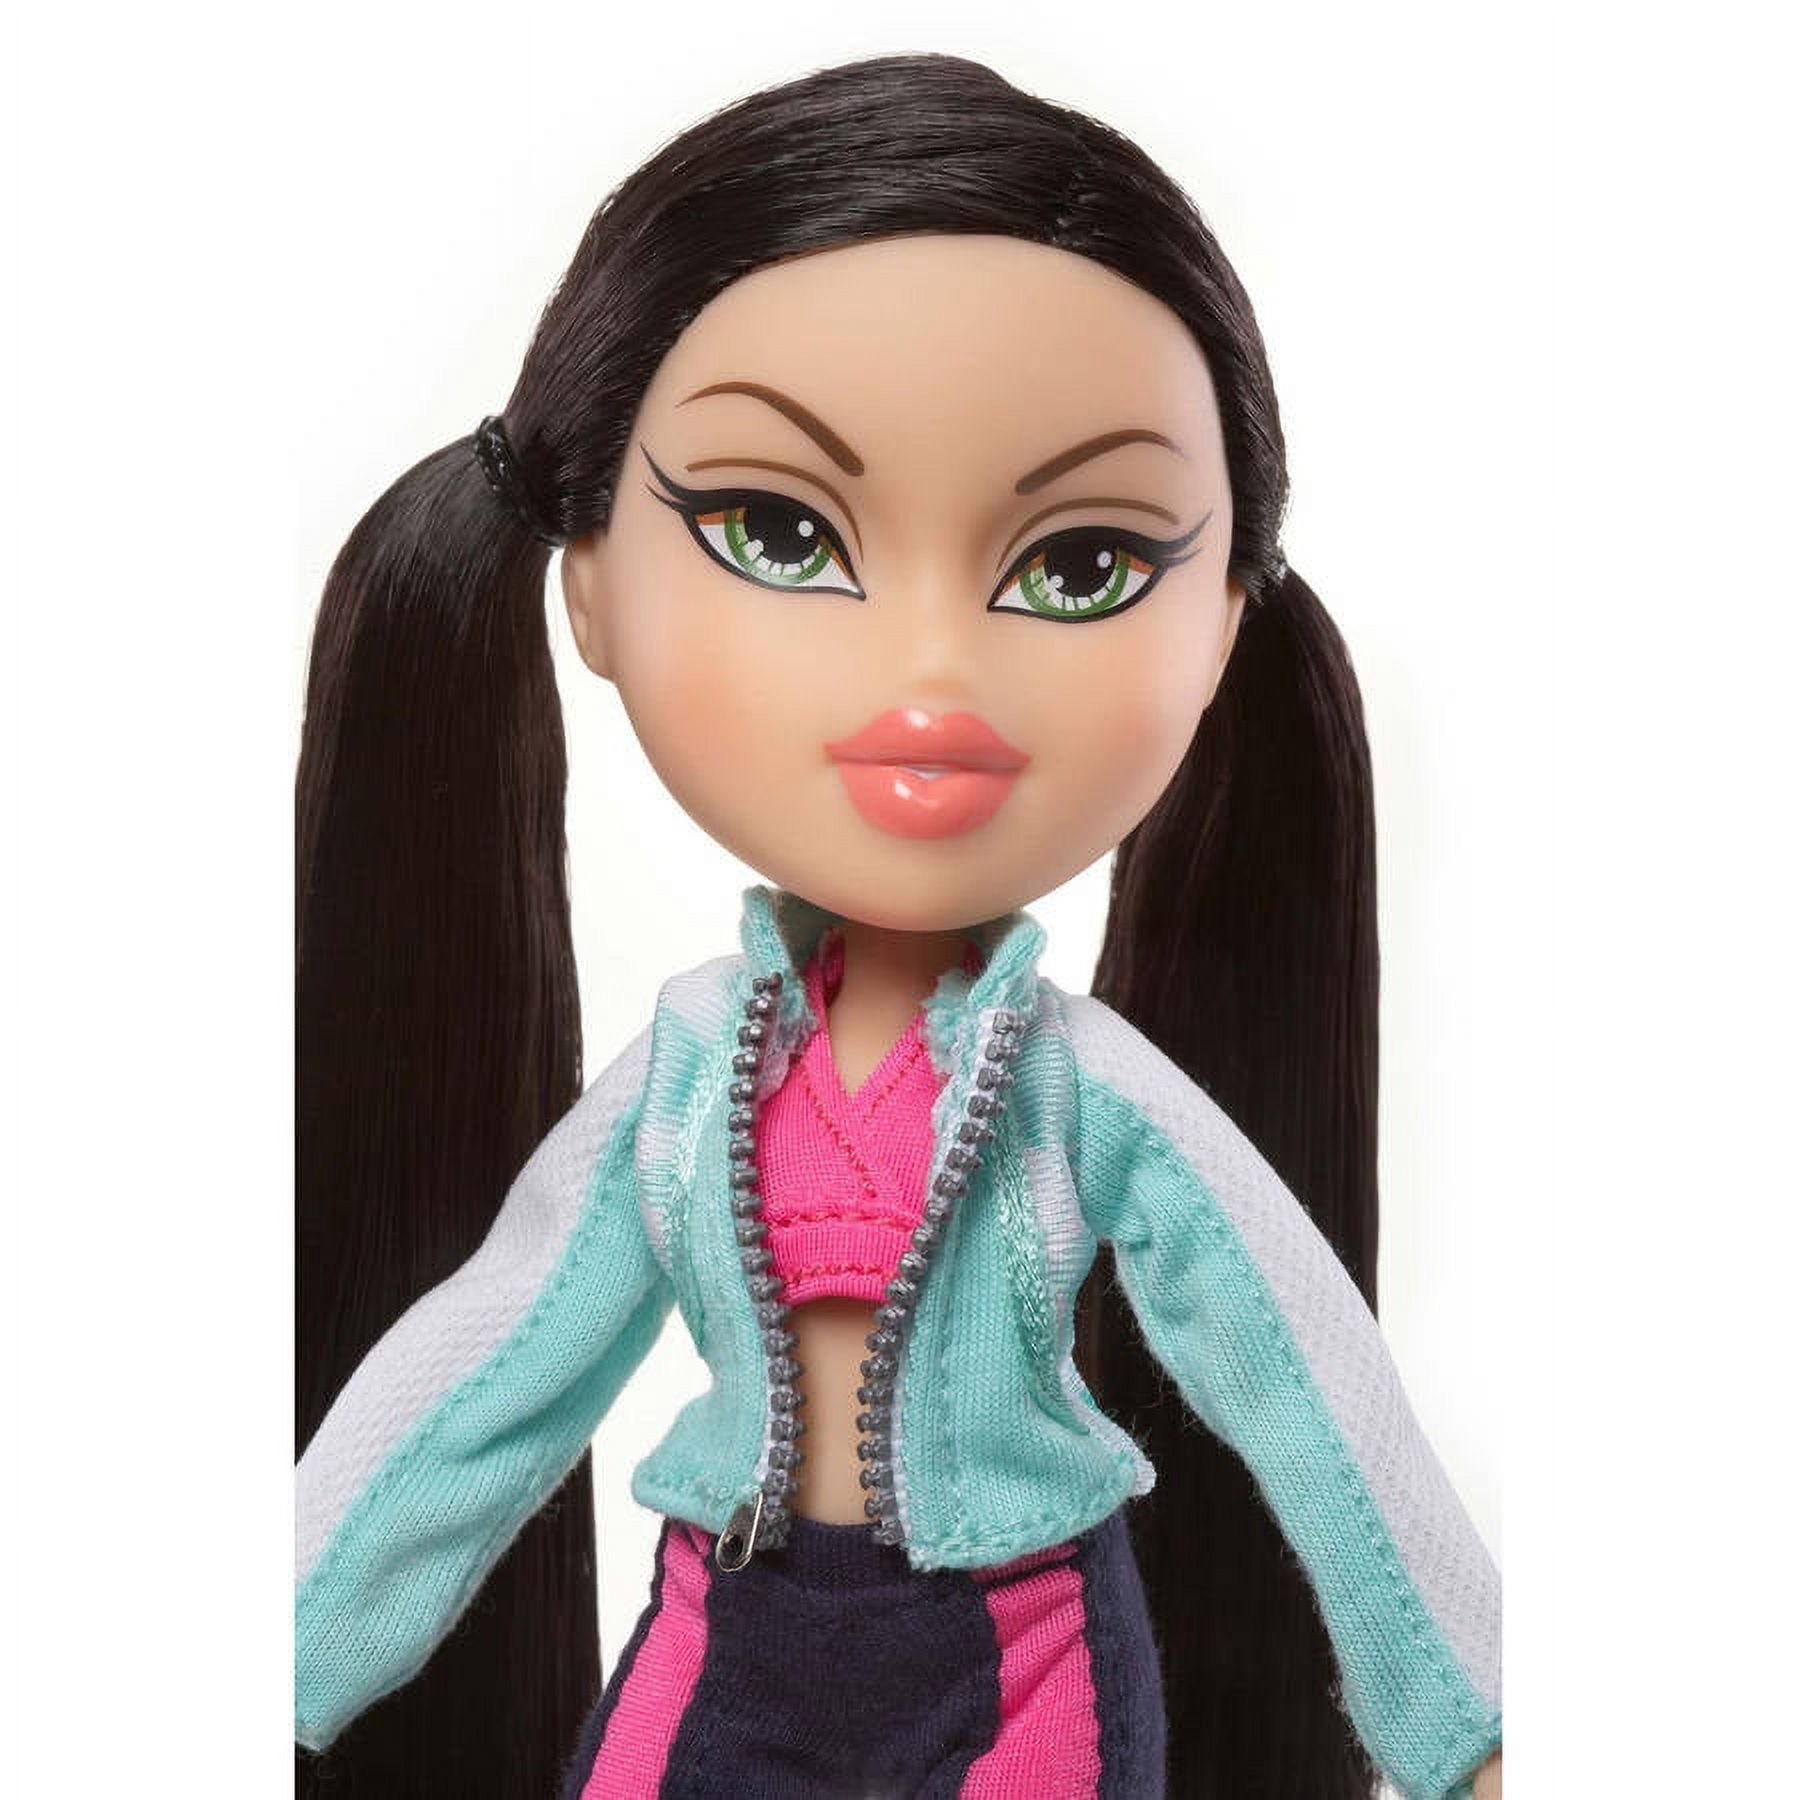 Bratz Fierce Fitness Doll, Jade, Great Gift for Children Ages 6, 7, 8+ - image 3 of 5